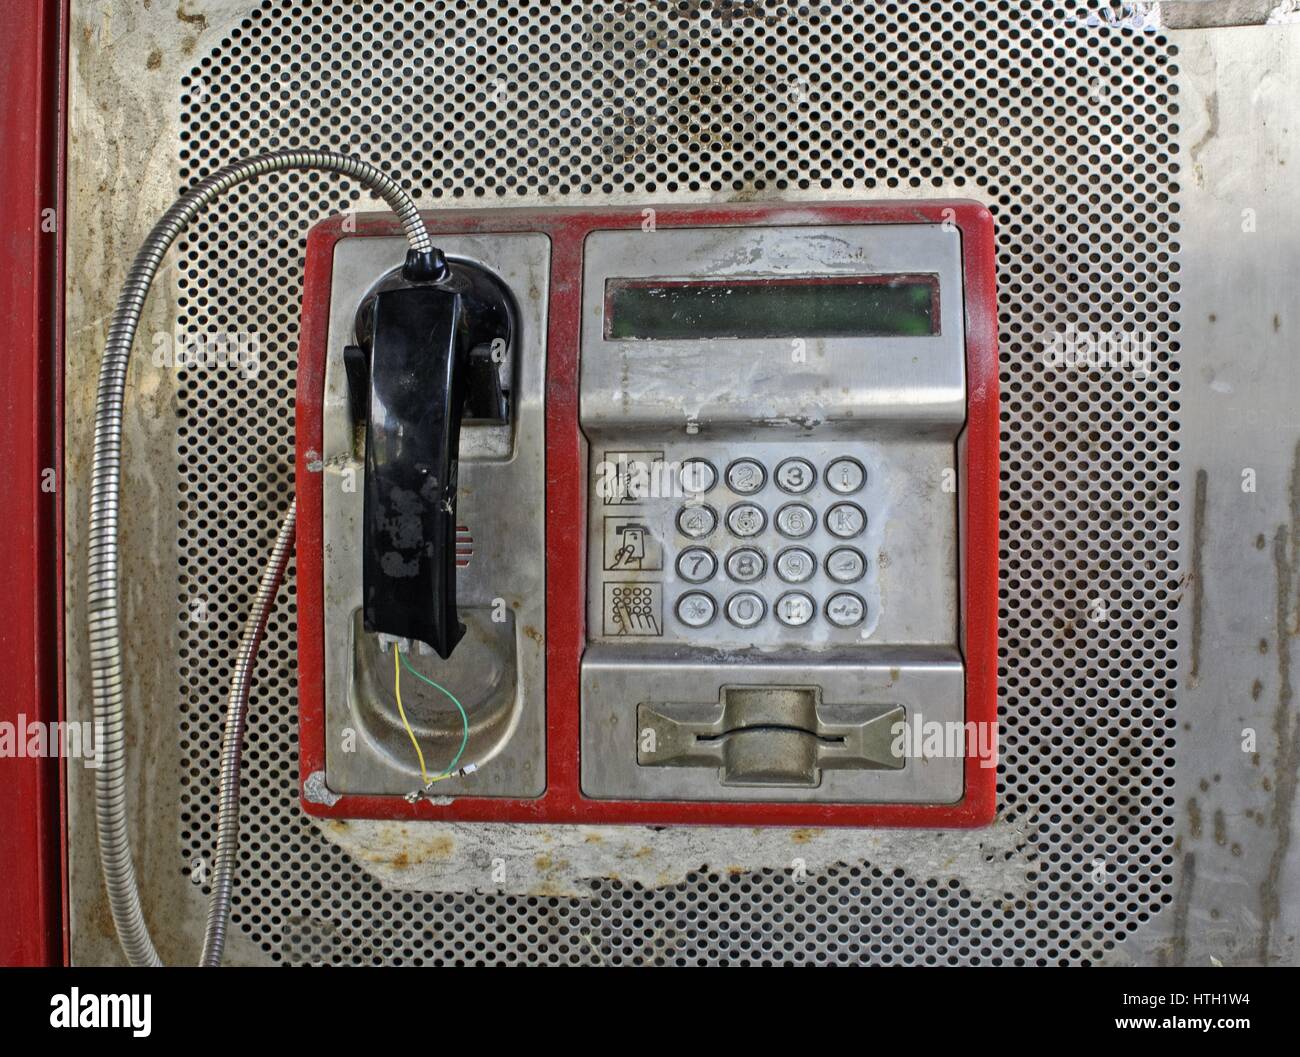 Violent damaged phone in the phone booth. Stock Photo